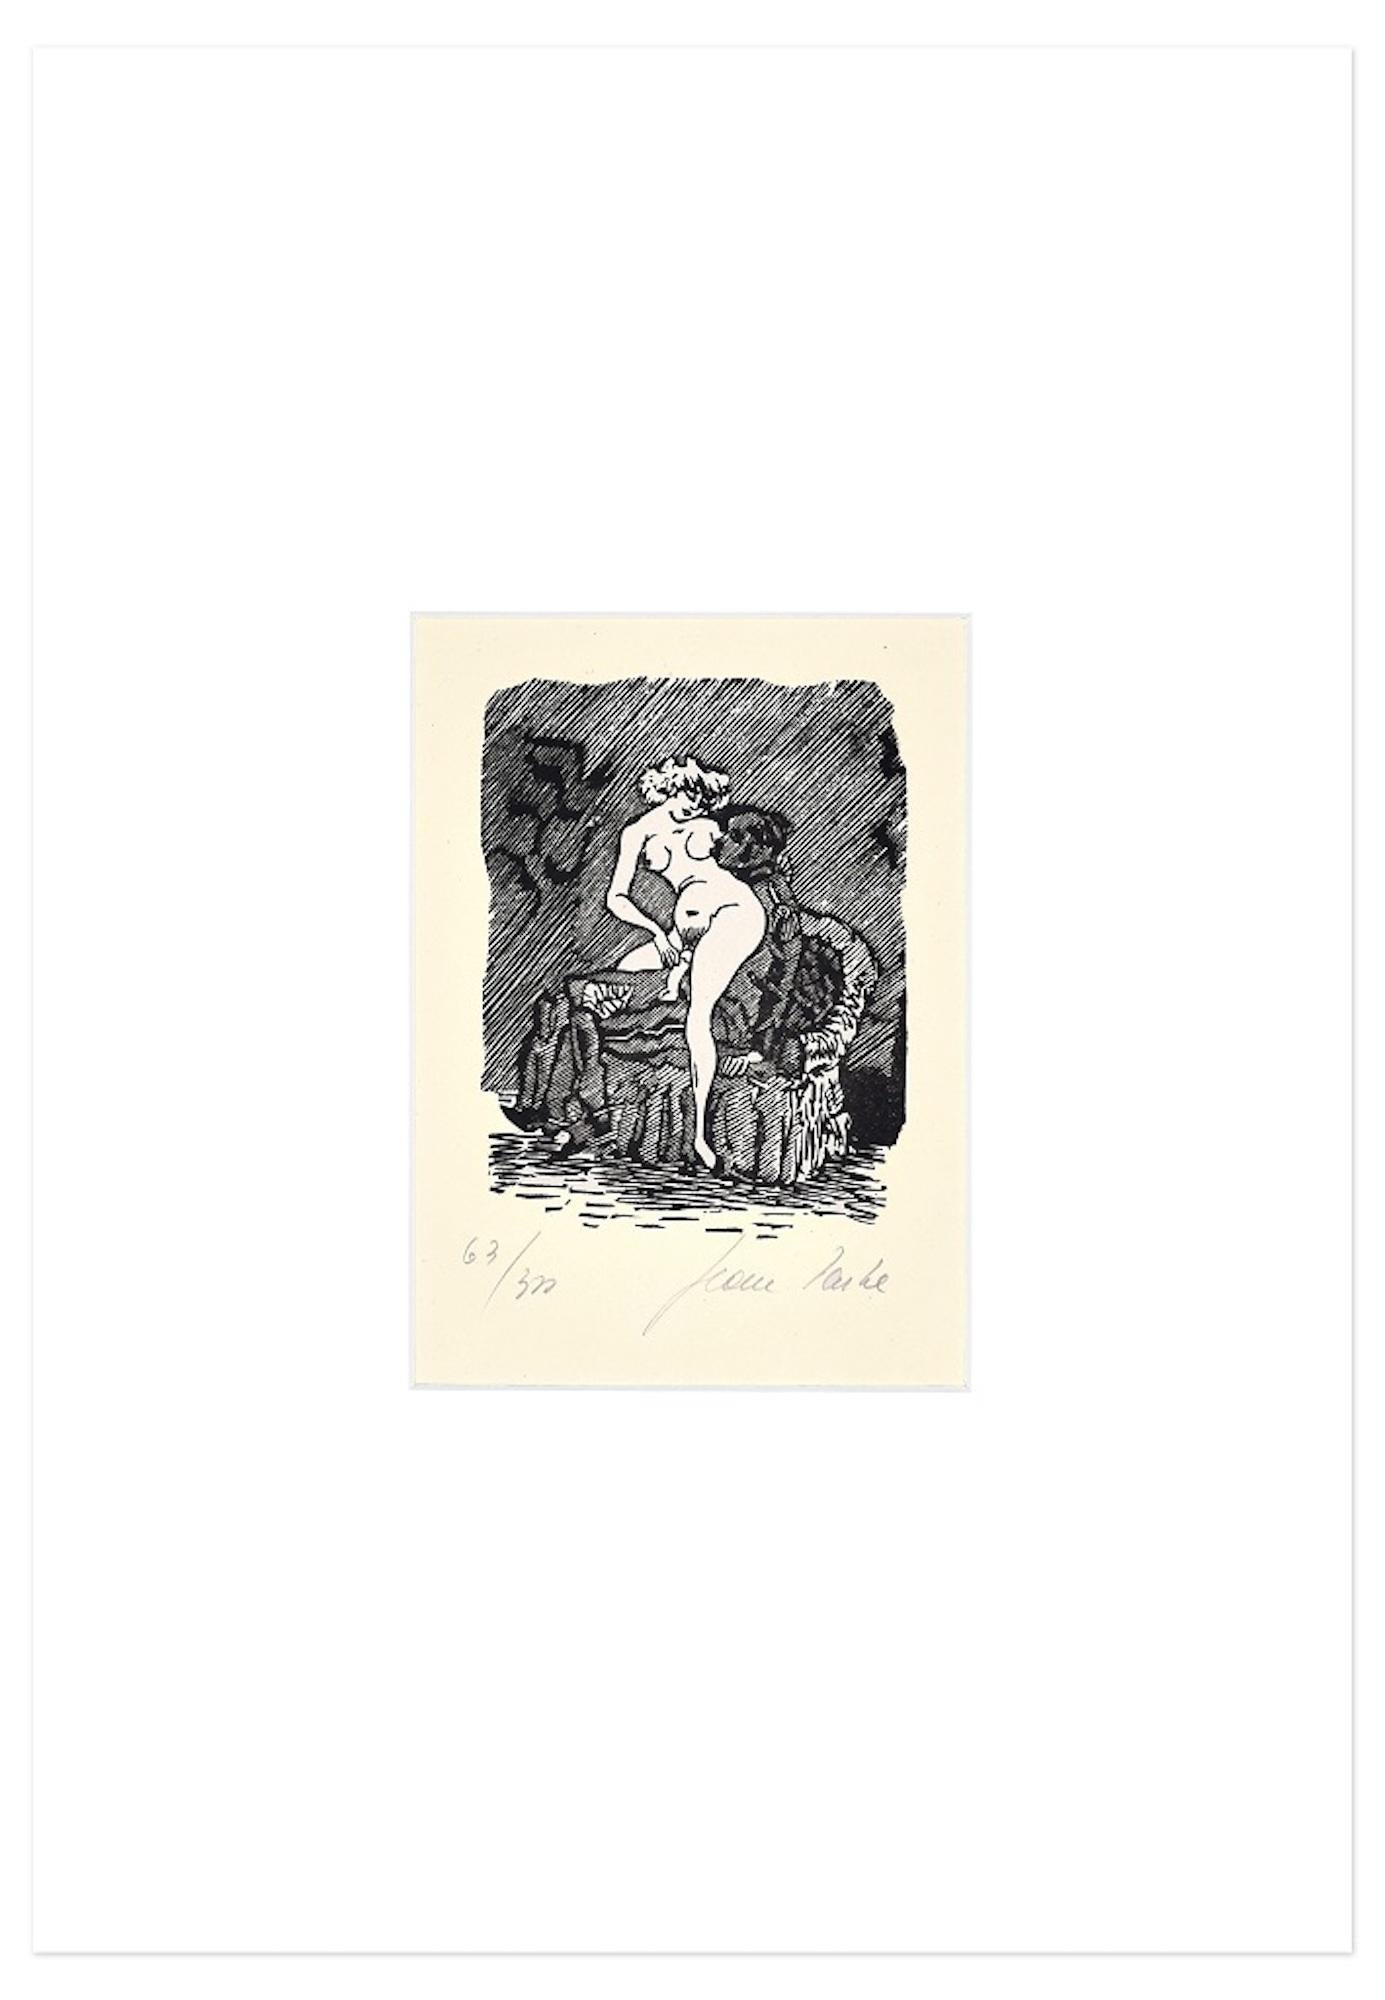 Intimate circumstance is a beautiful black and white linocut on ivory-colored paper, realized in 1945 by the Italian artist, Mino Maccari.

Hand-signed with the pseudonym 